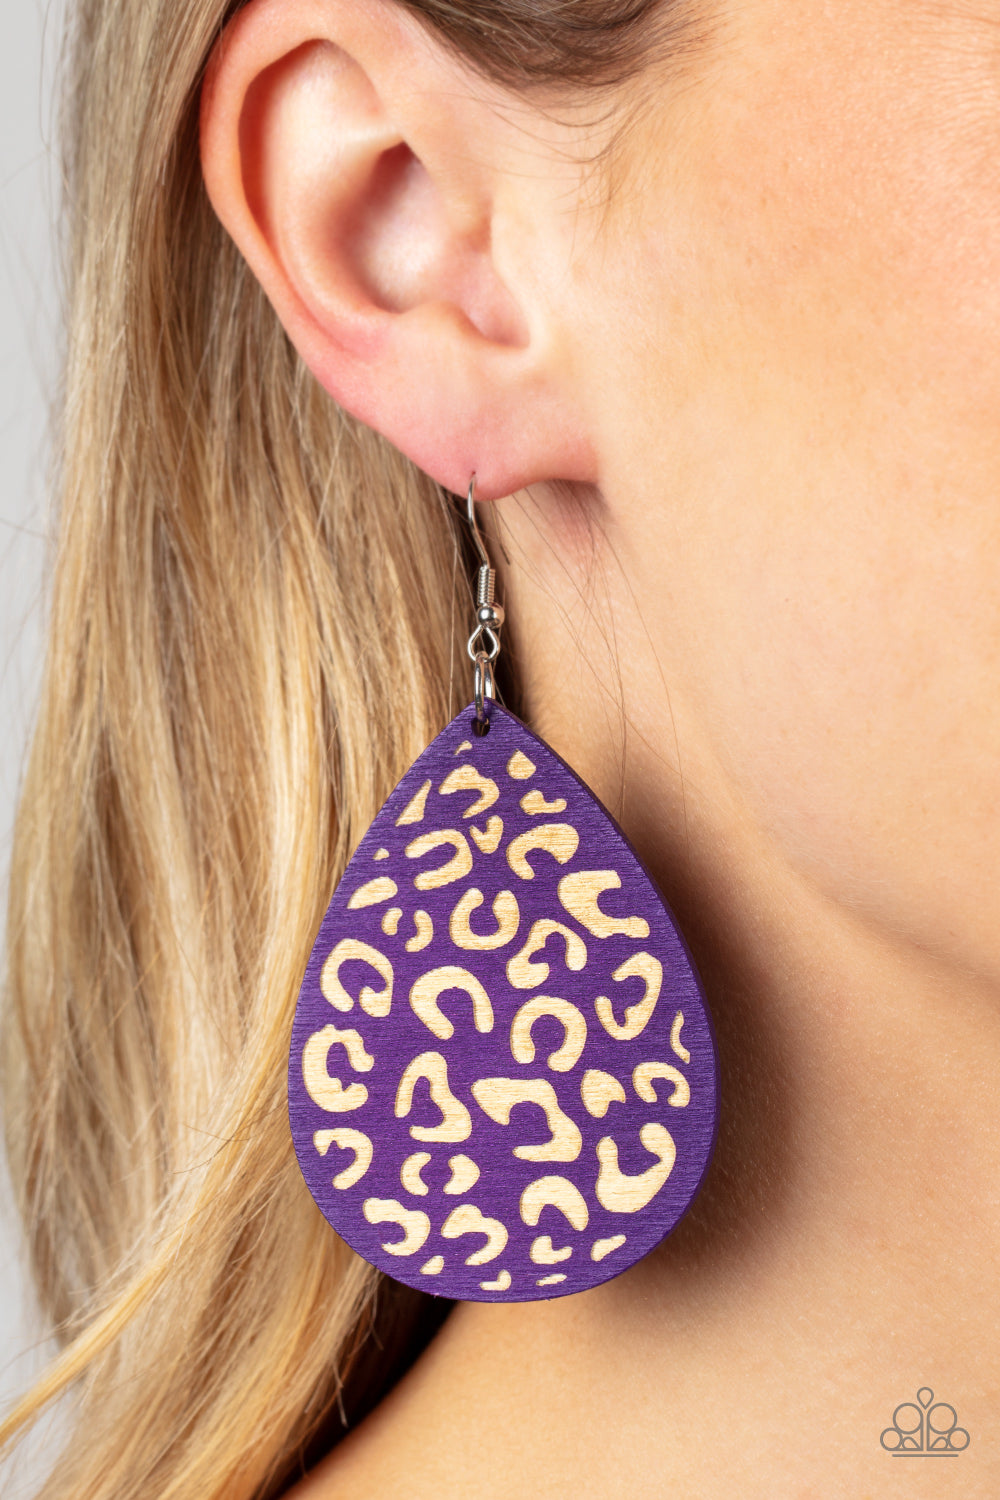 Suburban Jungle Purple Wooden Earring - Paparazzi Accessories  A purple wooden teardrop frame is etched in a cheetah-like pattern, creating a wildly fabulous fashion. Earring attaches to a standard fishhook fitting.  Sold as one pair of earrings.